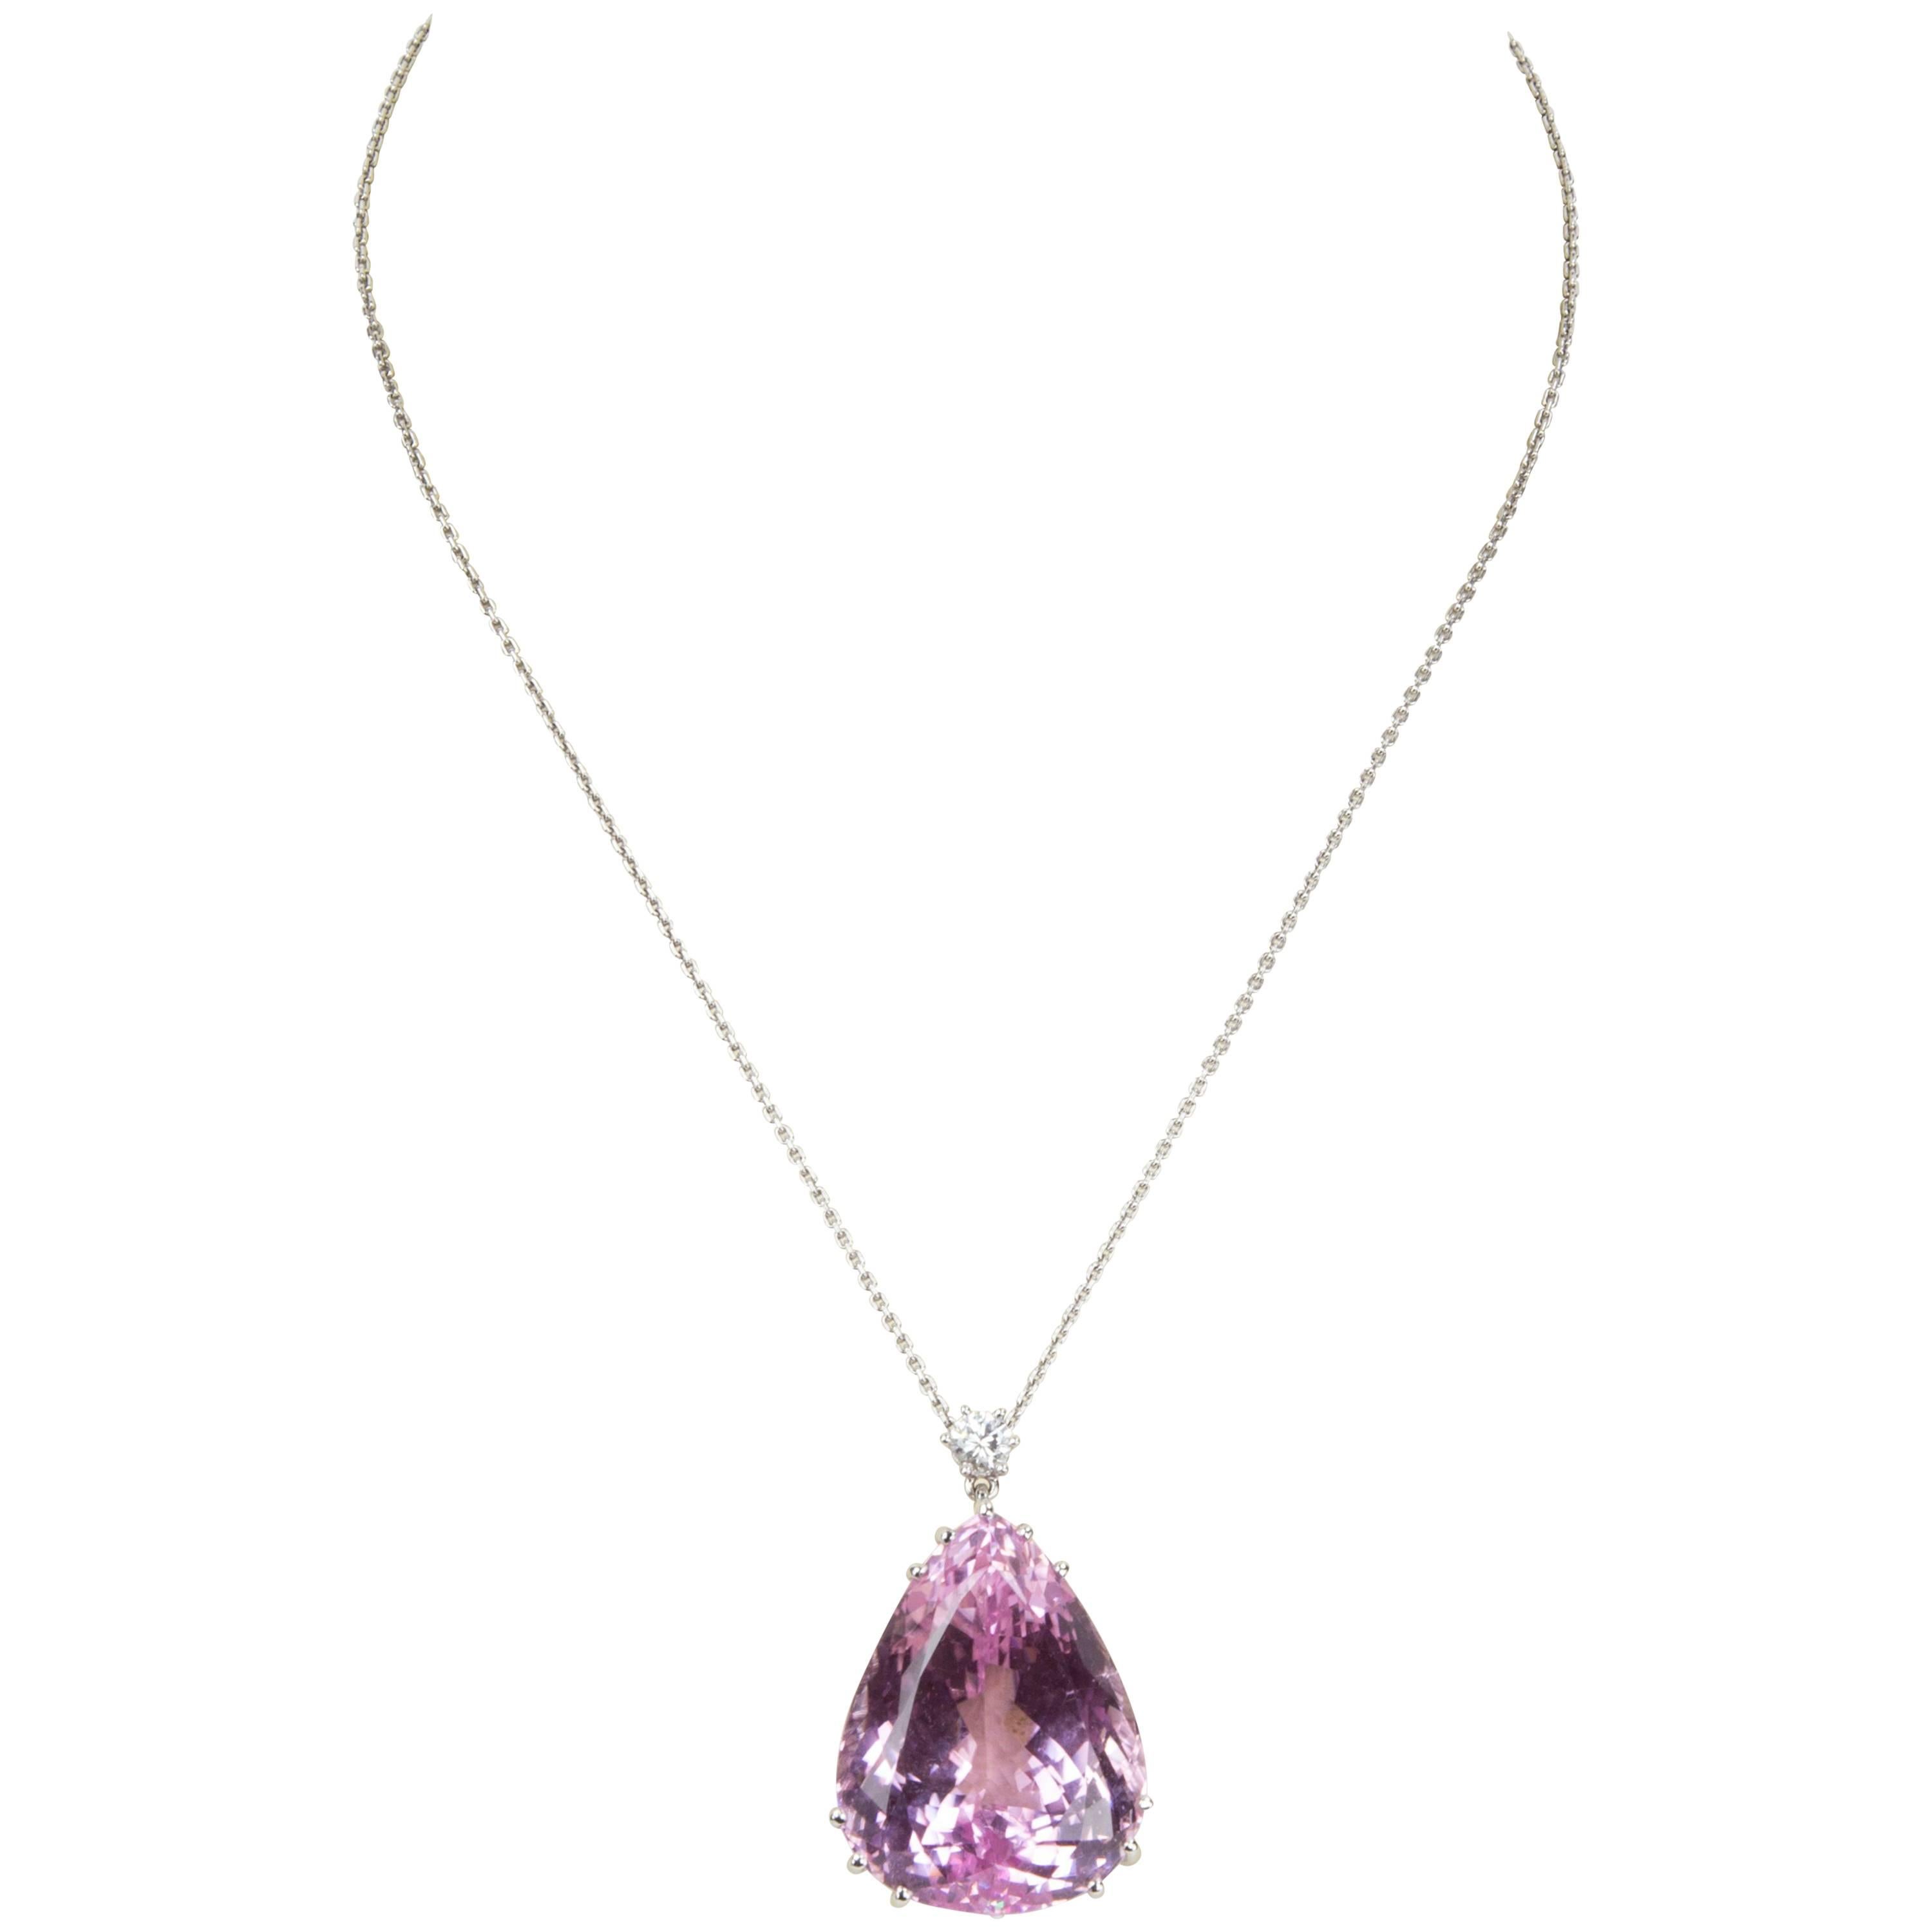 Sensational Pendant Necklace featuring a Teardrop faceted Pink Kunzite weighing approx. 130ct, and a Round Brilliant-cut Diamond, weighing approx. .65ct; hand crafted in 18k white gold mounting; suspended on an 18k white gold chain, approx. 18